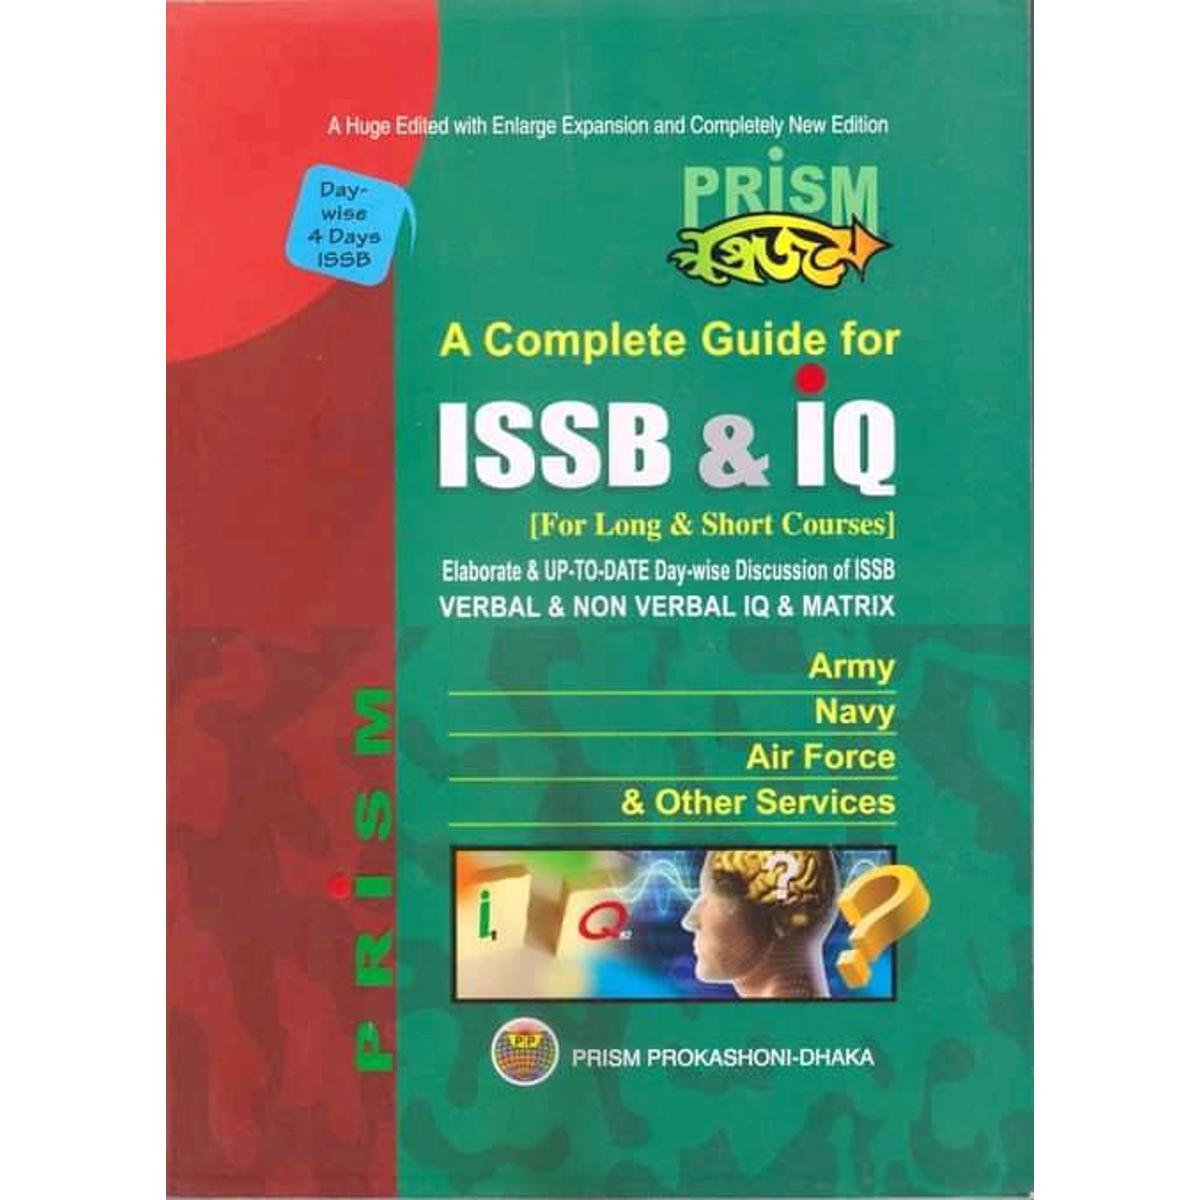 Prism ISSB & IQ for Long & Short Courses